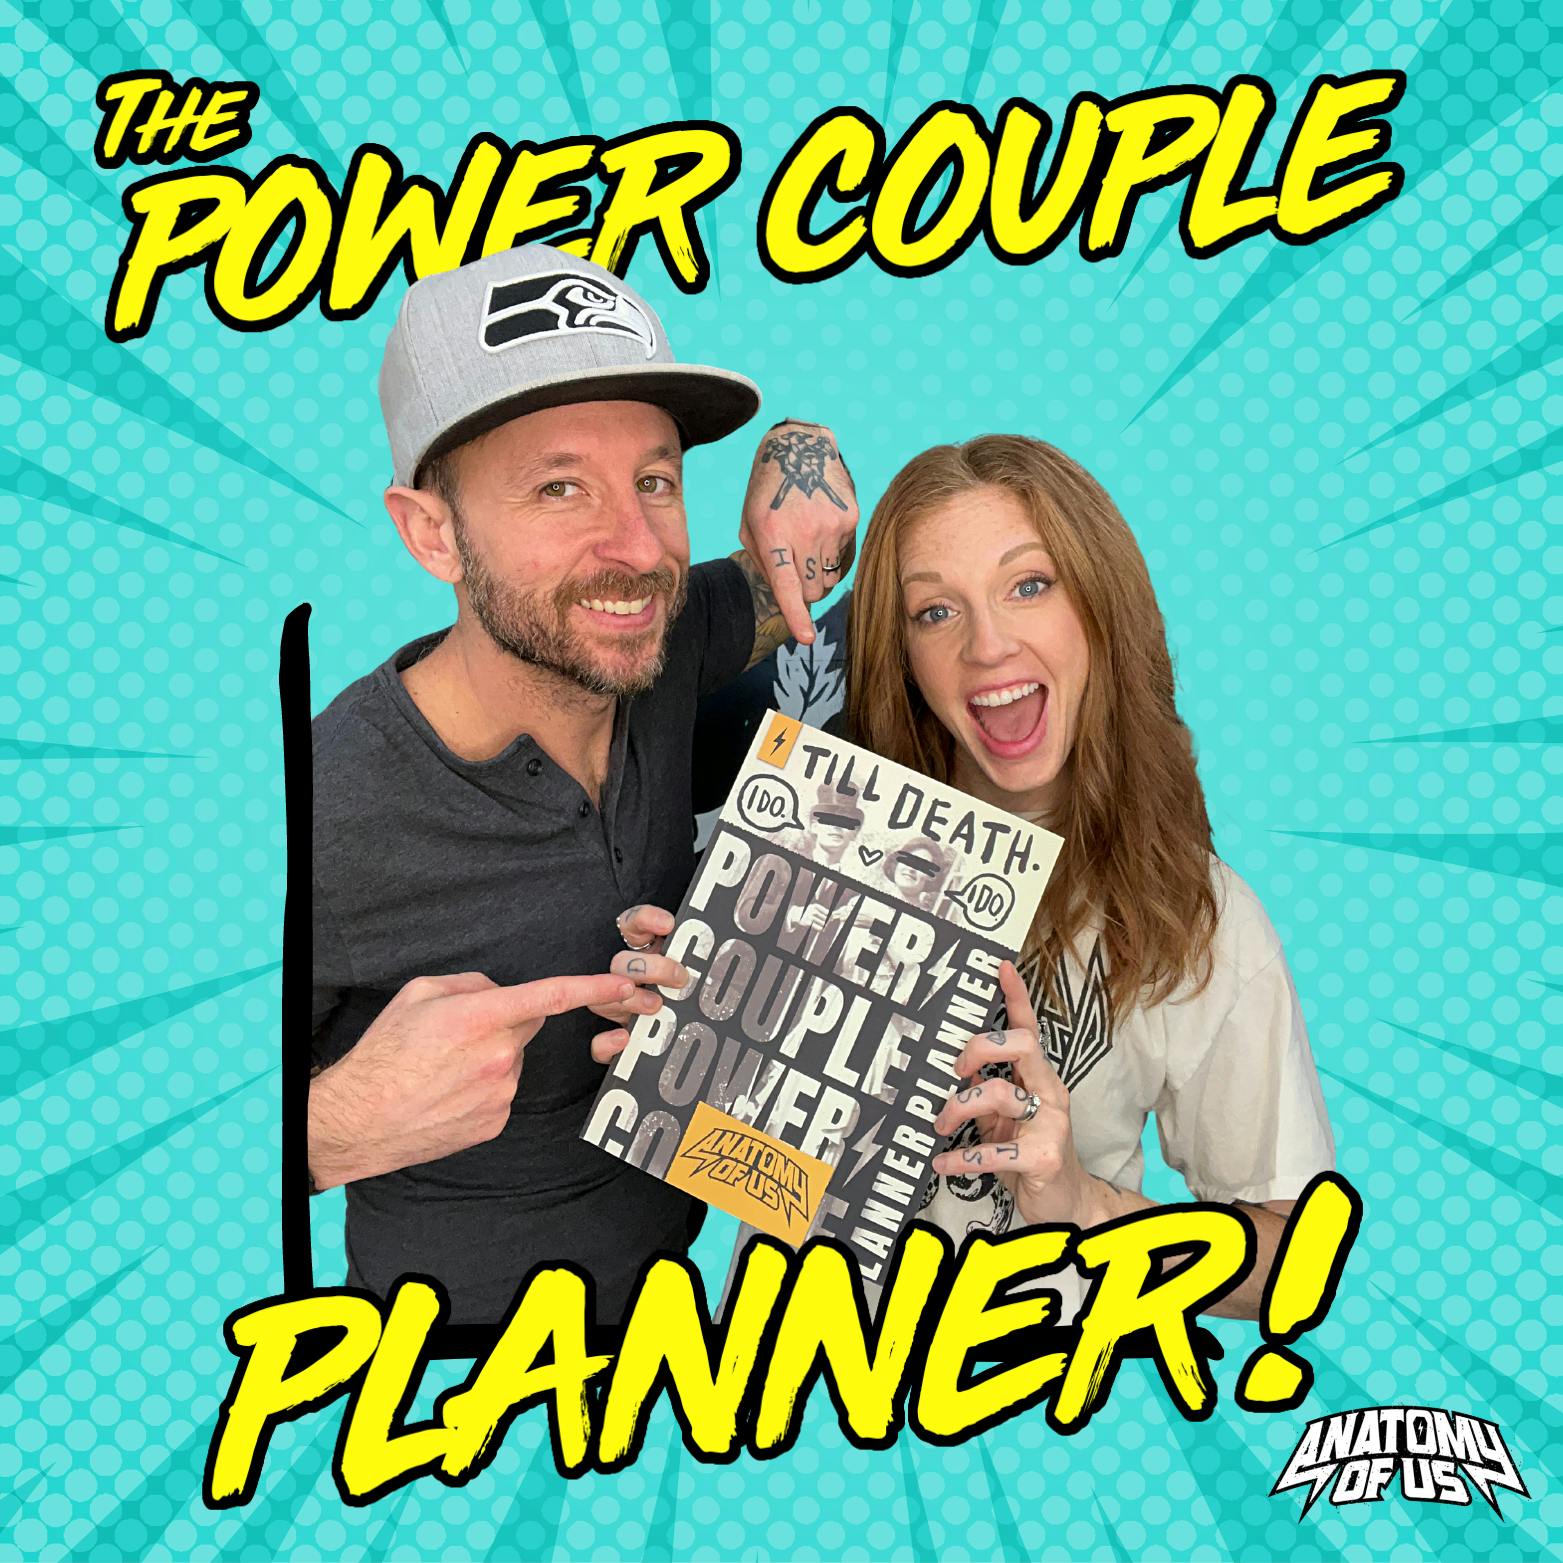 The Power Couple Planner!